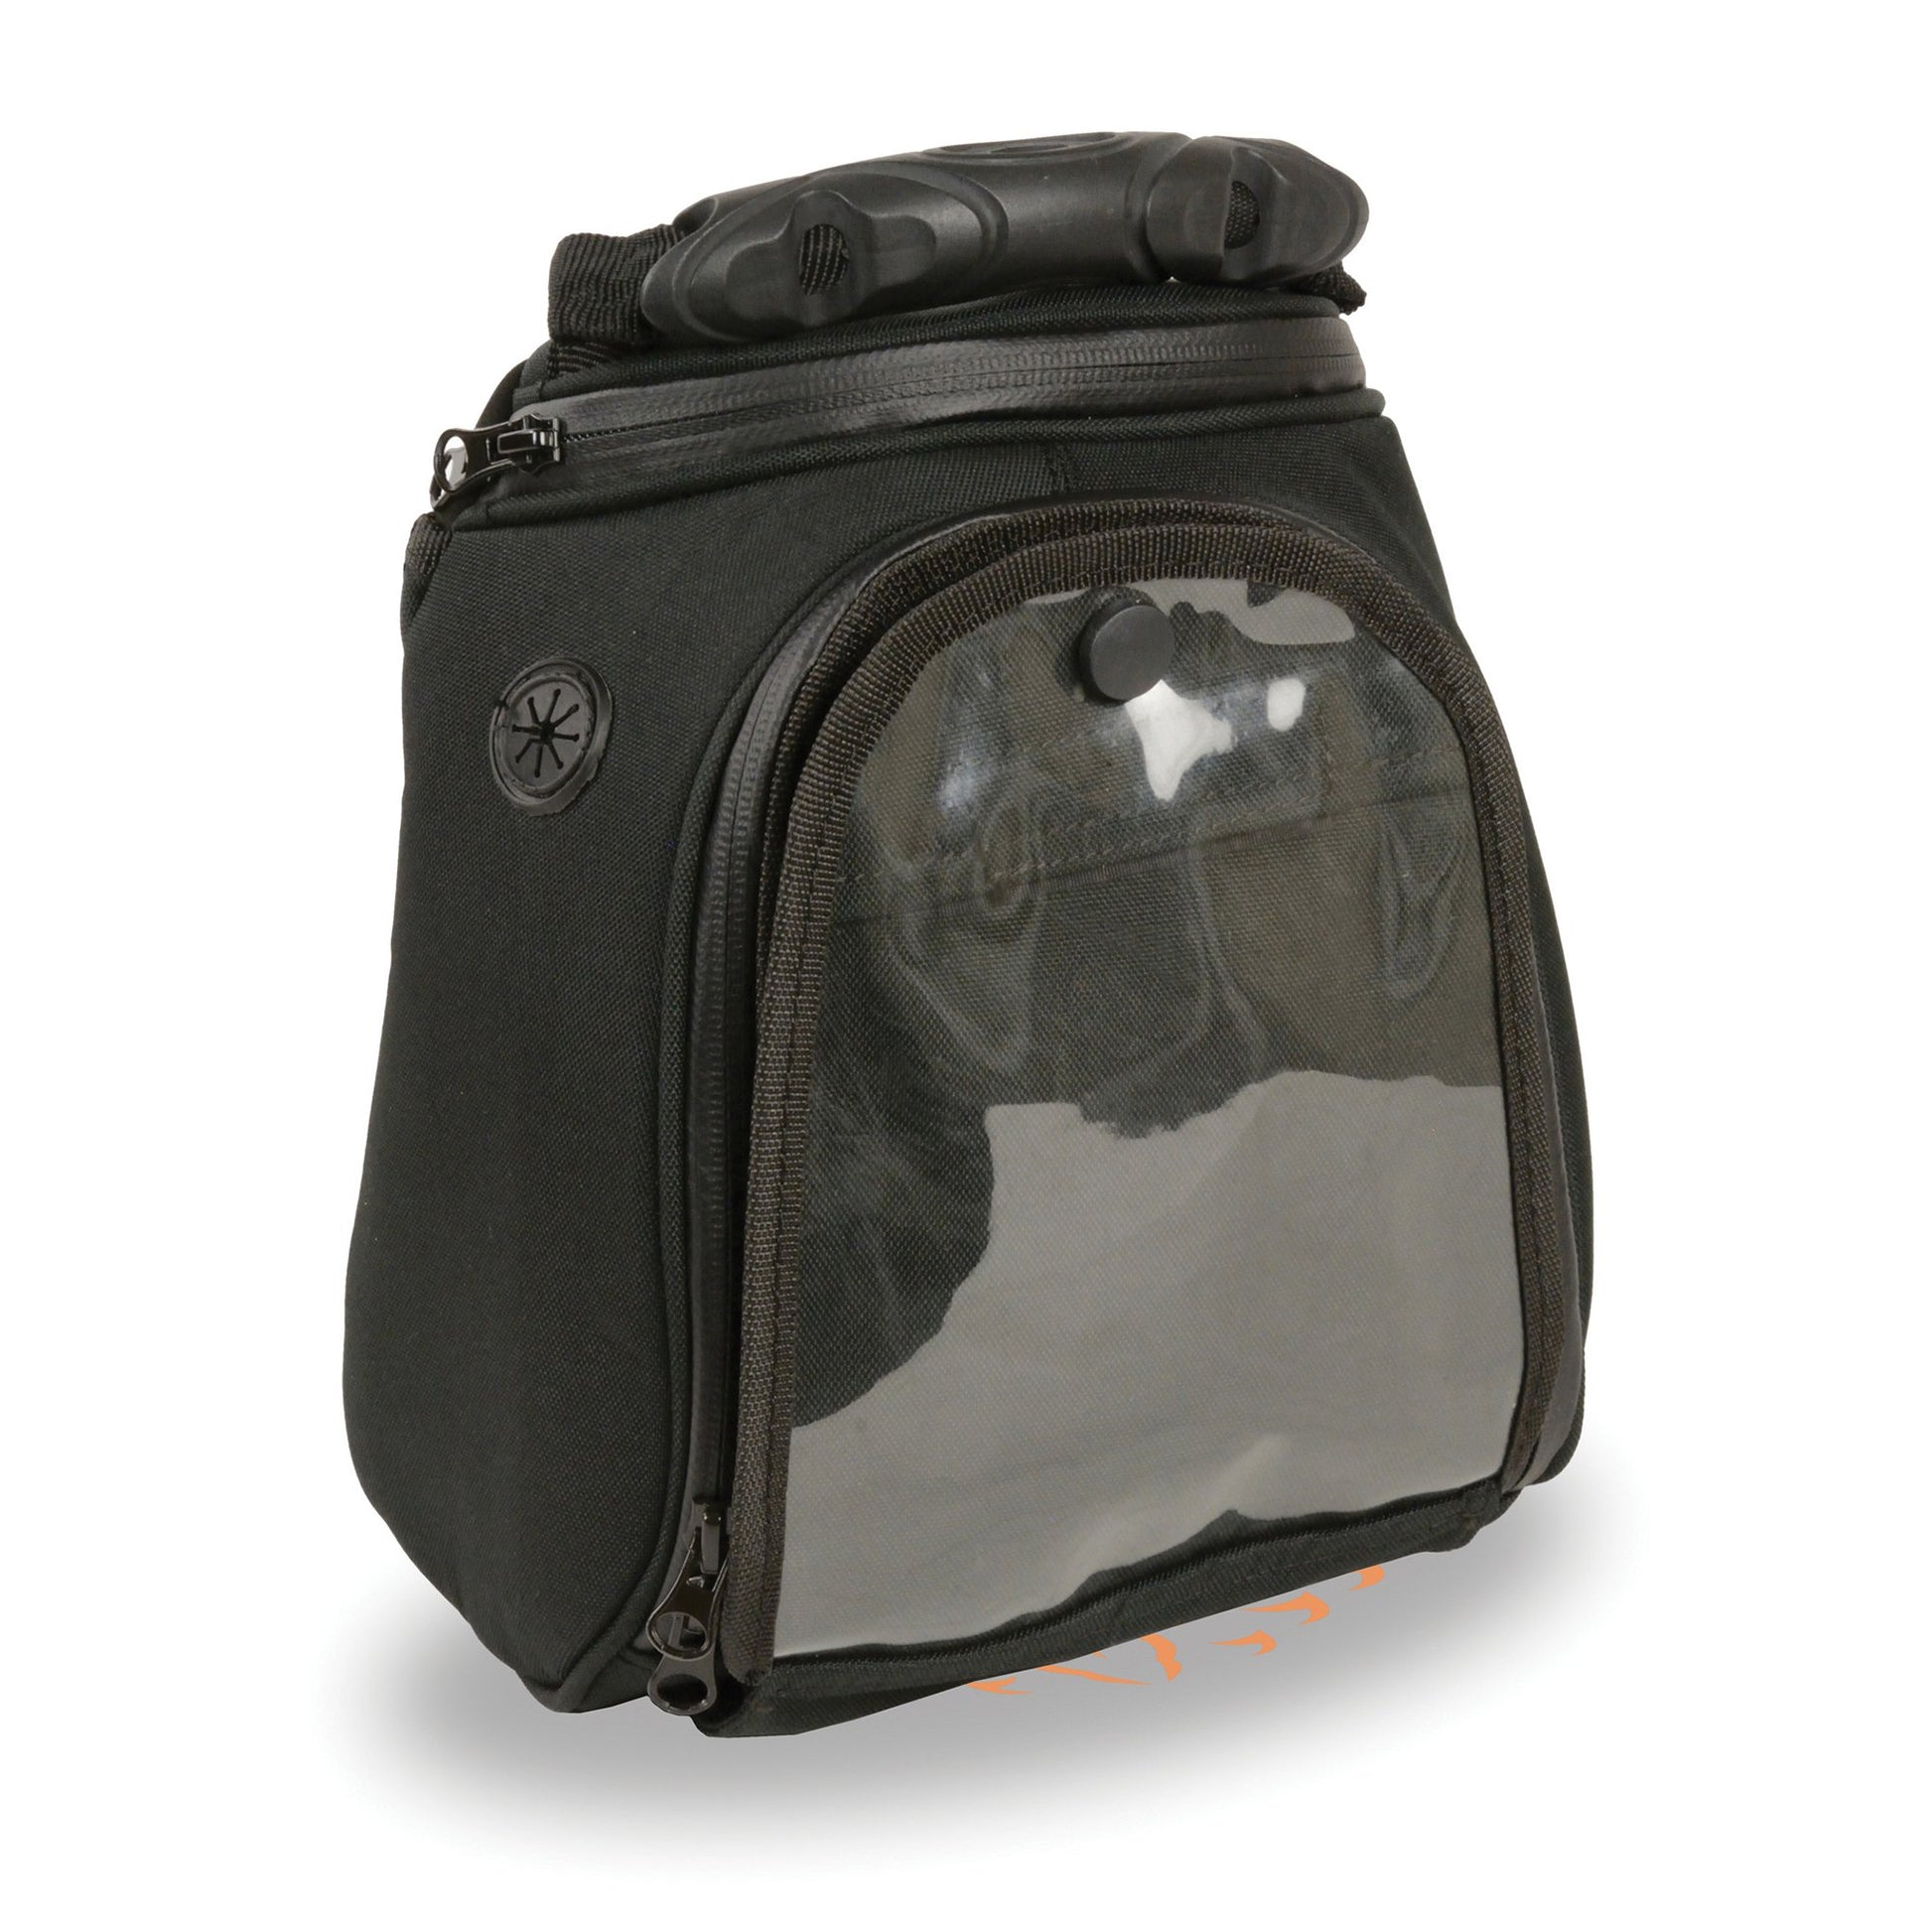 Milwaukee Leather SH677 Black Small Textile Magnetic Motorcycle Tank Bag